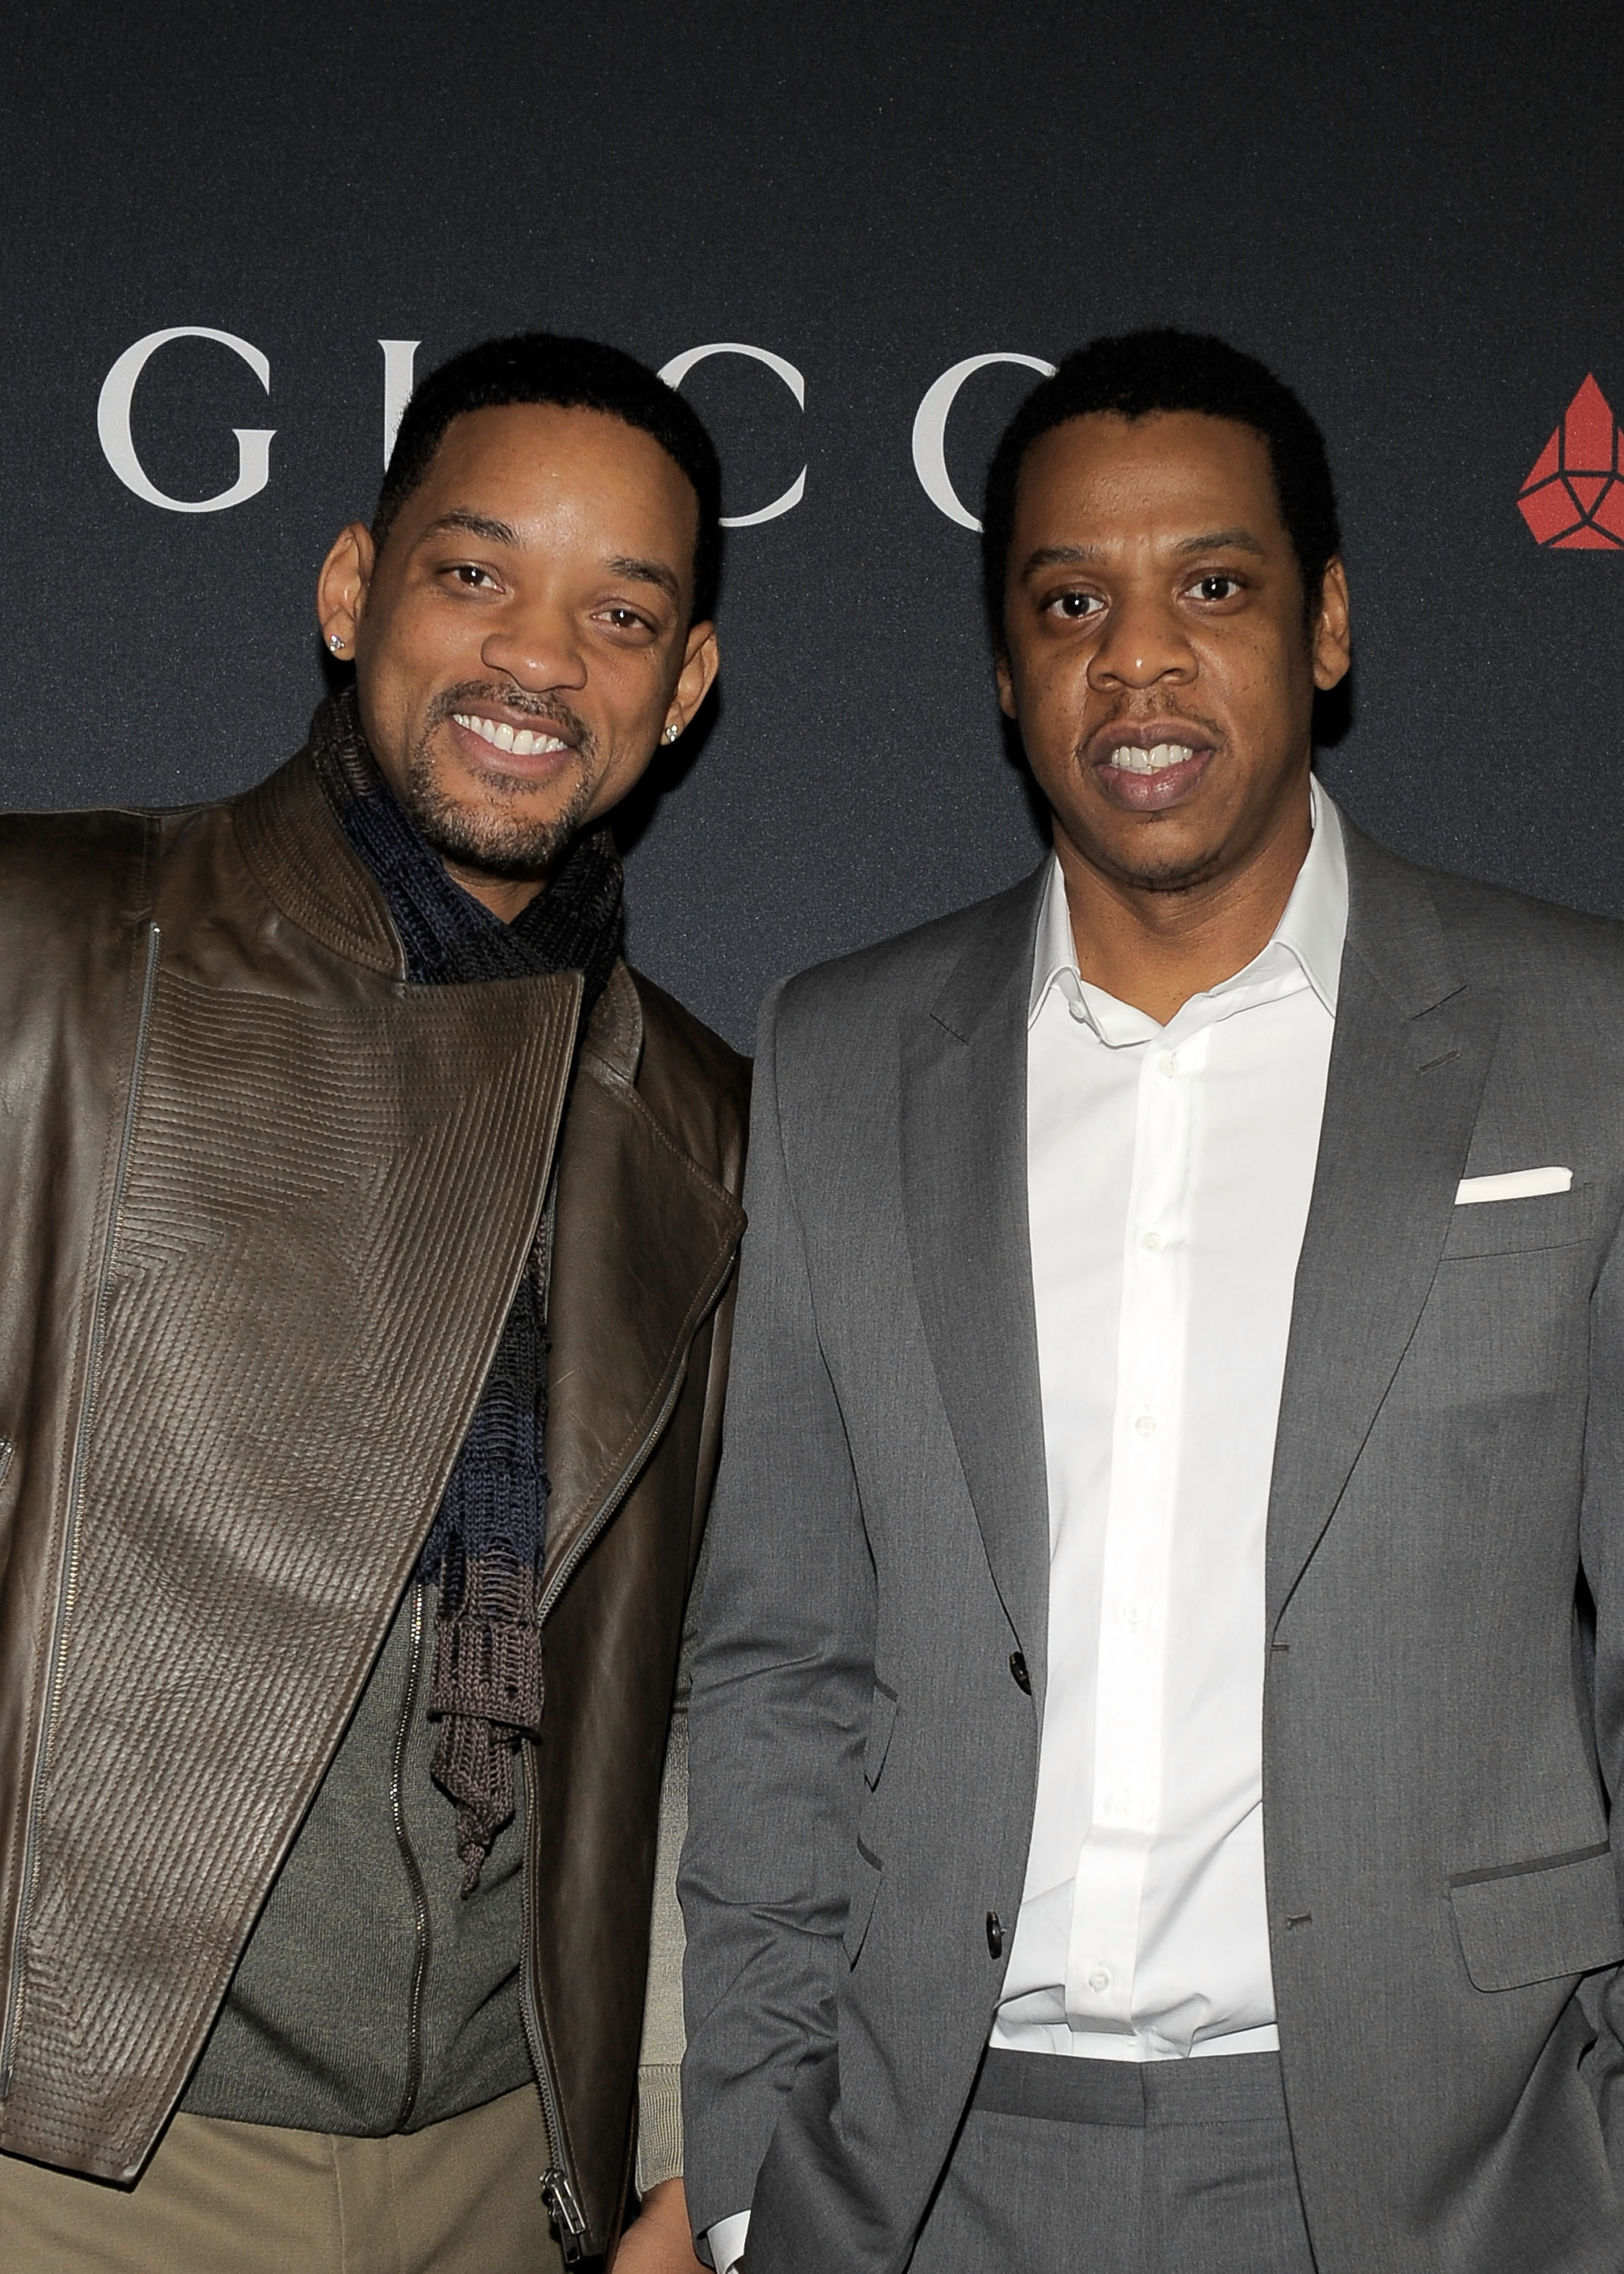 Actor Will Smith (L) and Rapper Jay-Z arrive at the Gucci and RocNation Pre-GRAMMY brunch held at Soho House on February 12, 2011 in West Hollywood, California. (Charley Gallay&mdash;2011 Getty Images)